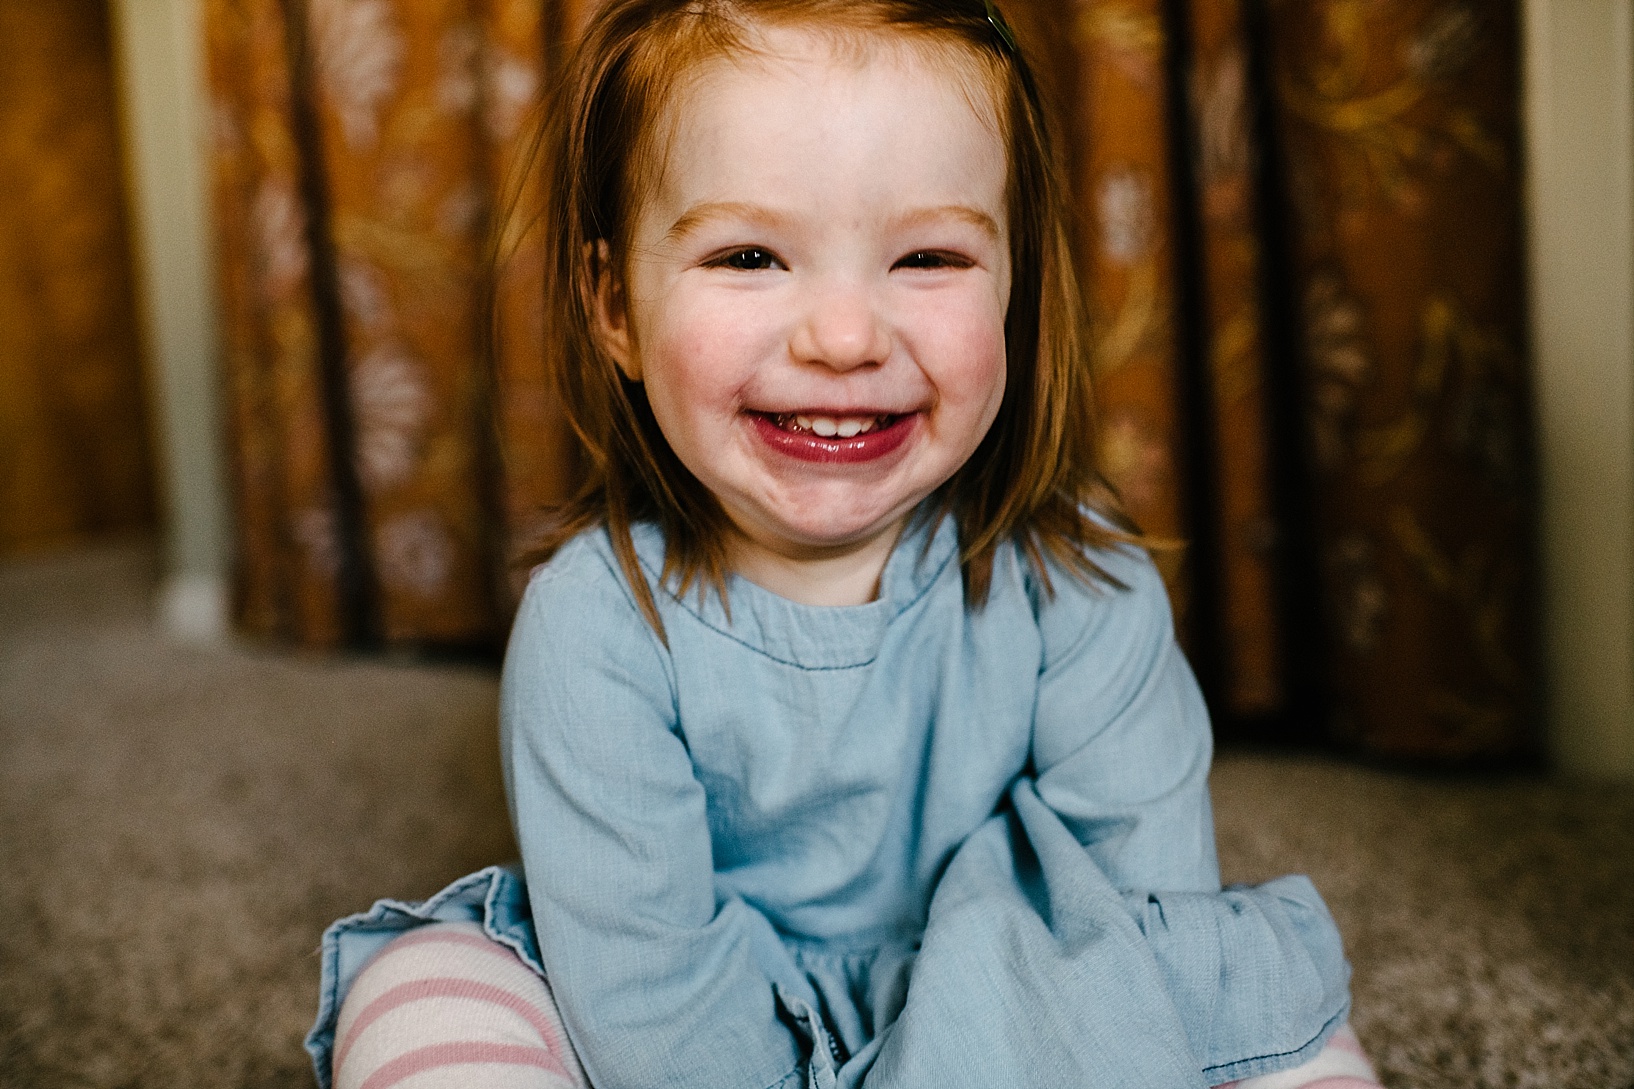 toddler girl with red hair smiling 2 Years old